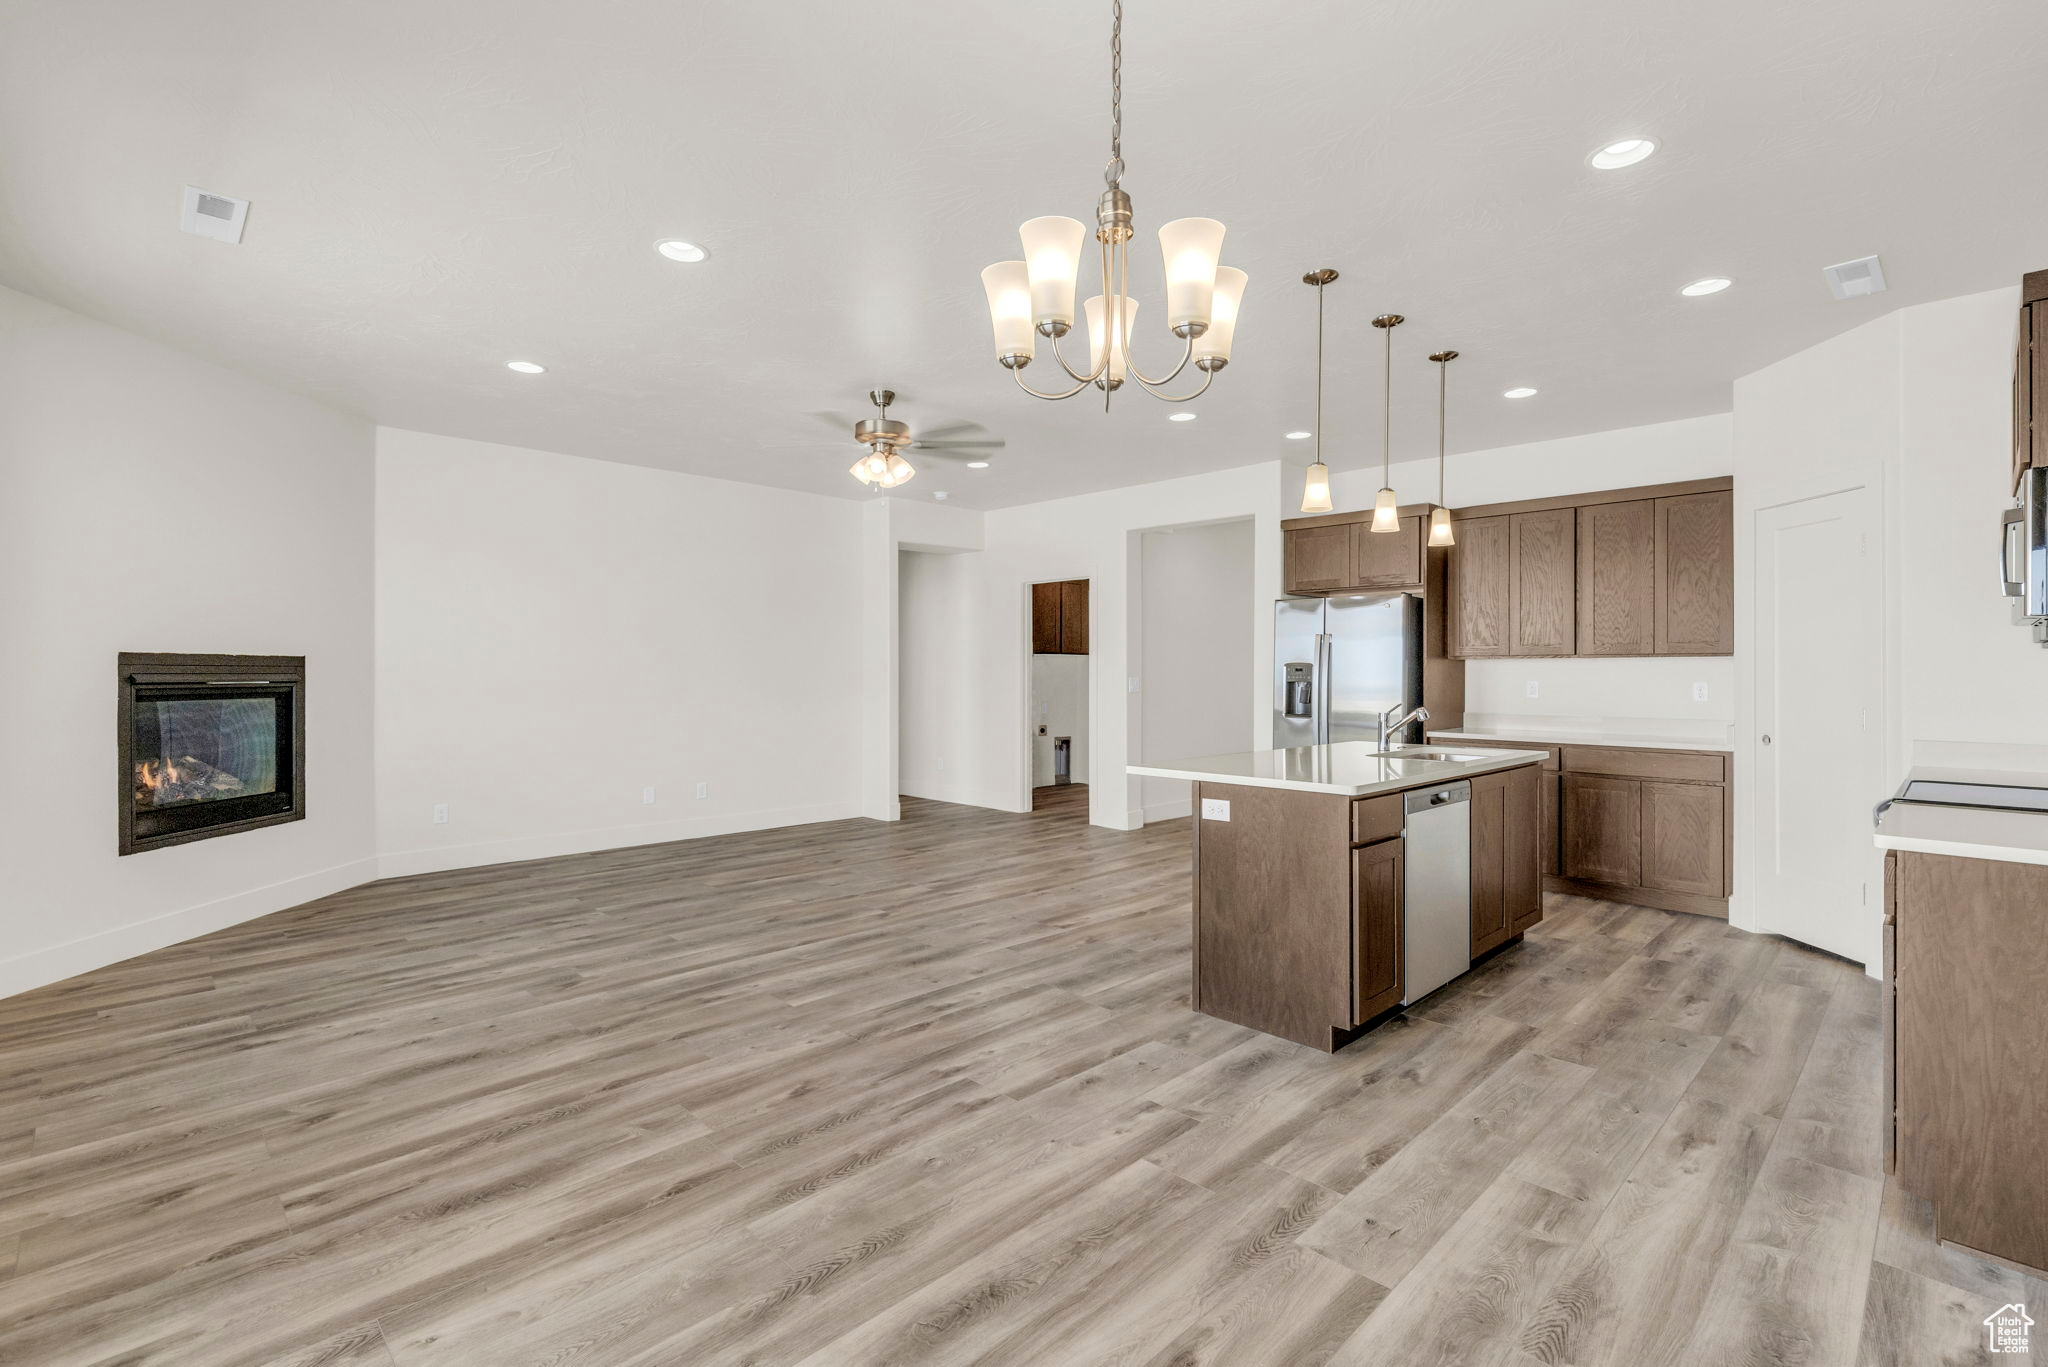 Kitchen featuring ceiling fan with notable chandelier, stainless steel appliances, light hardwood / wood-style flooring, an island with sink, and decorative light fixtures